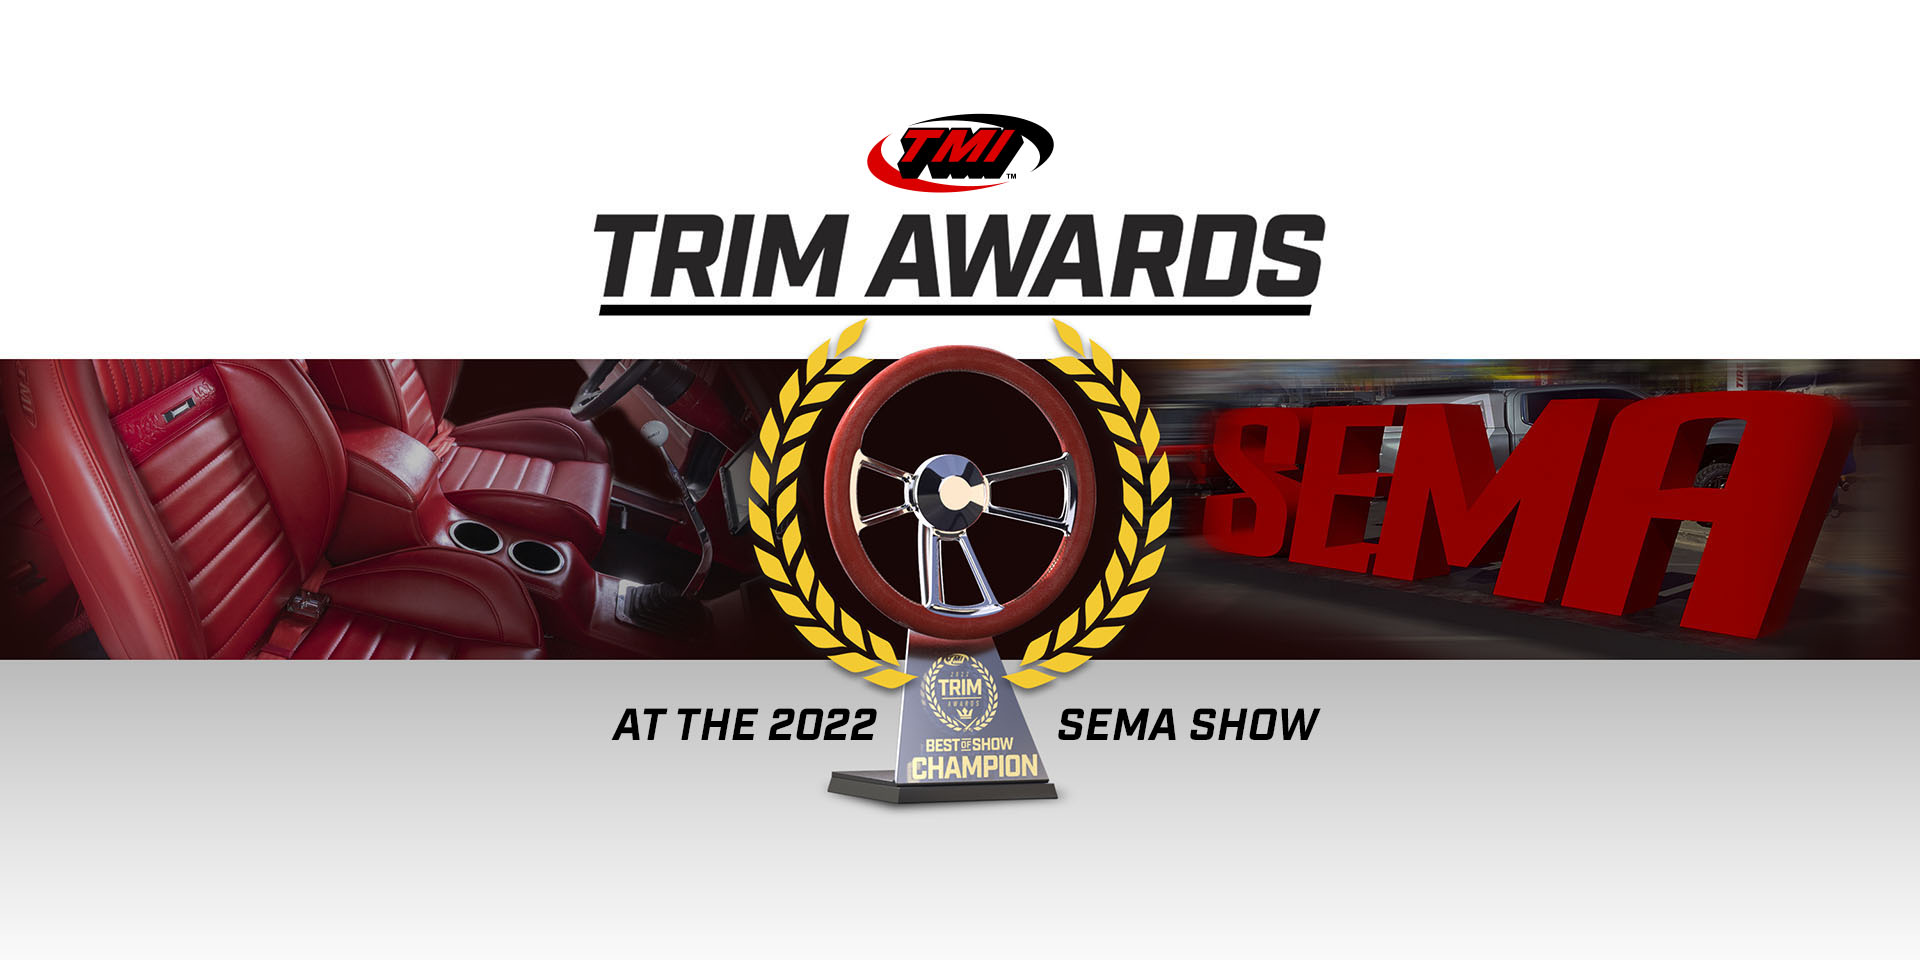 TMI Products to Present TRIM Awards at 2022 SEMA Show | THE SHOP